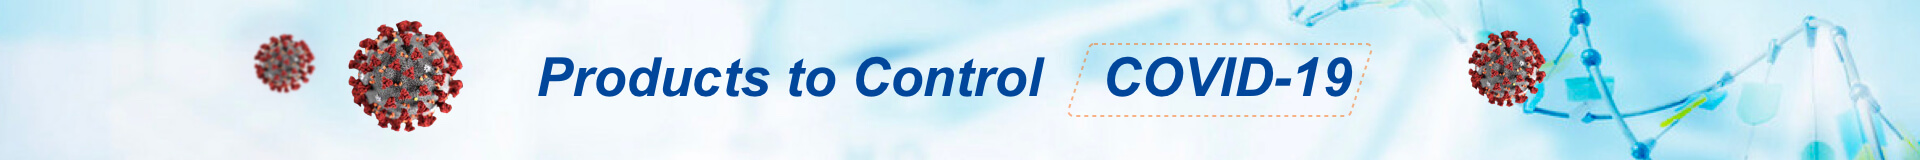 Products to Control COVID-19